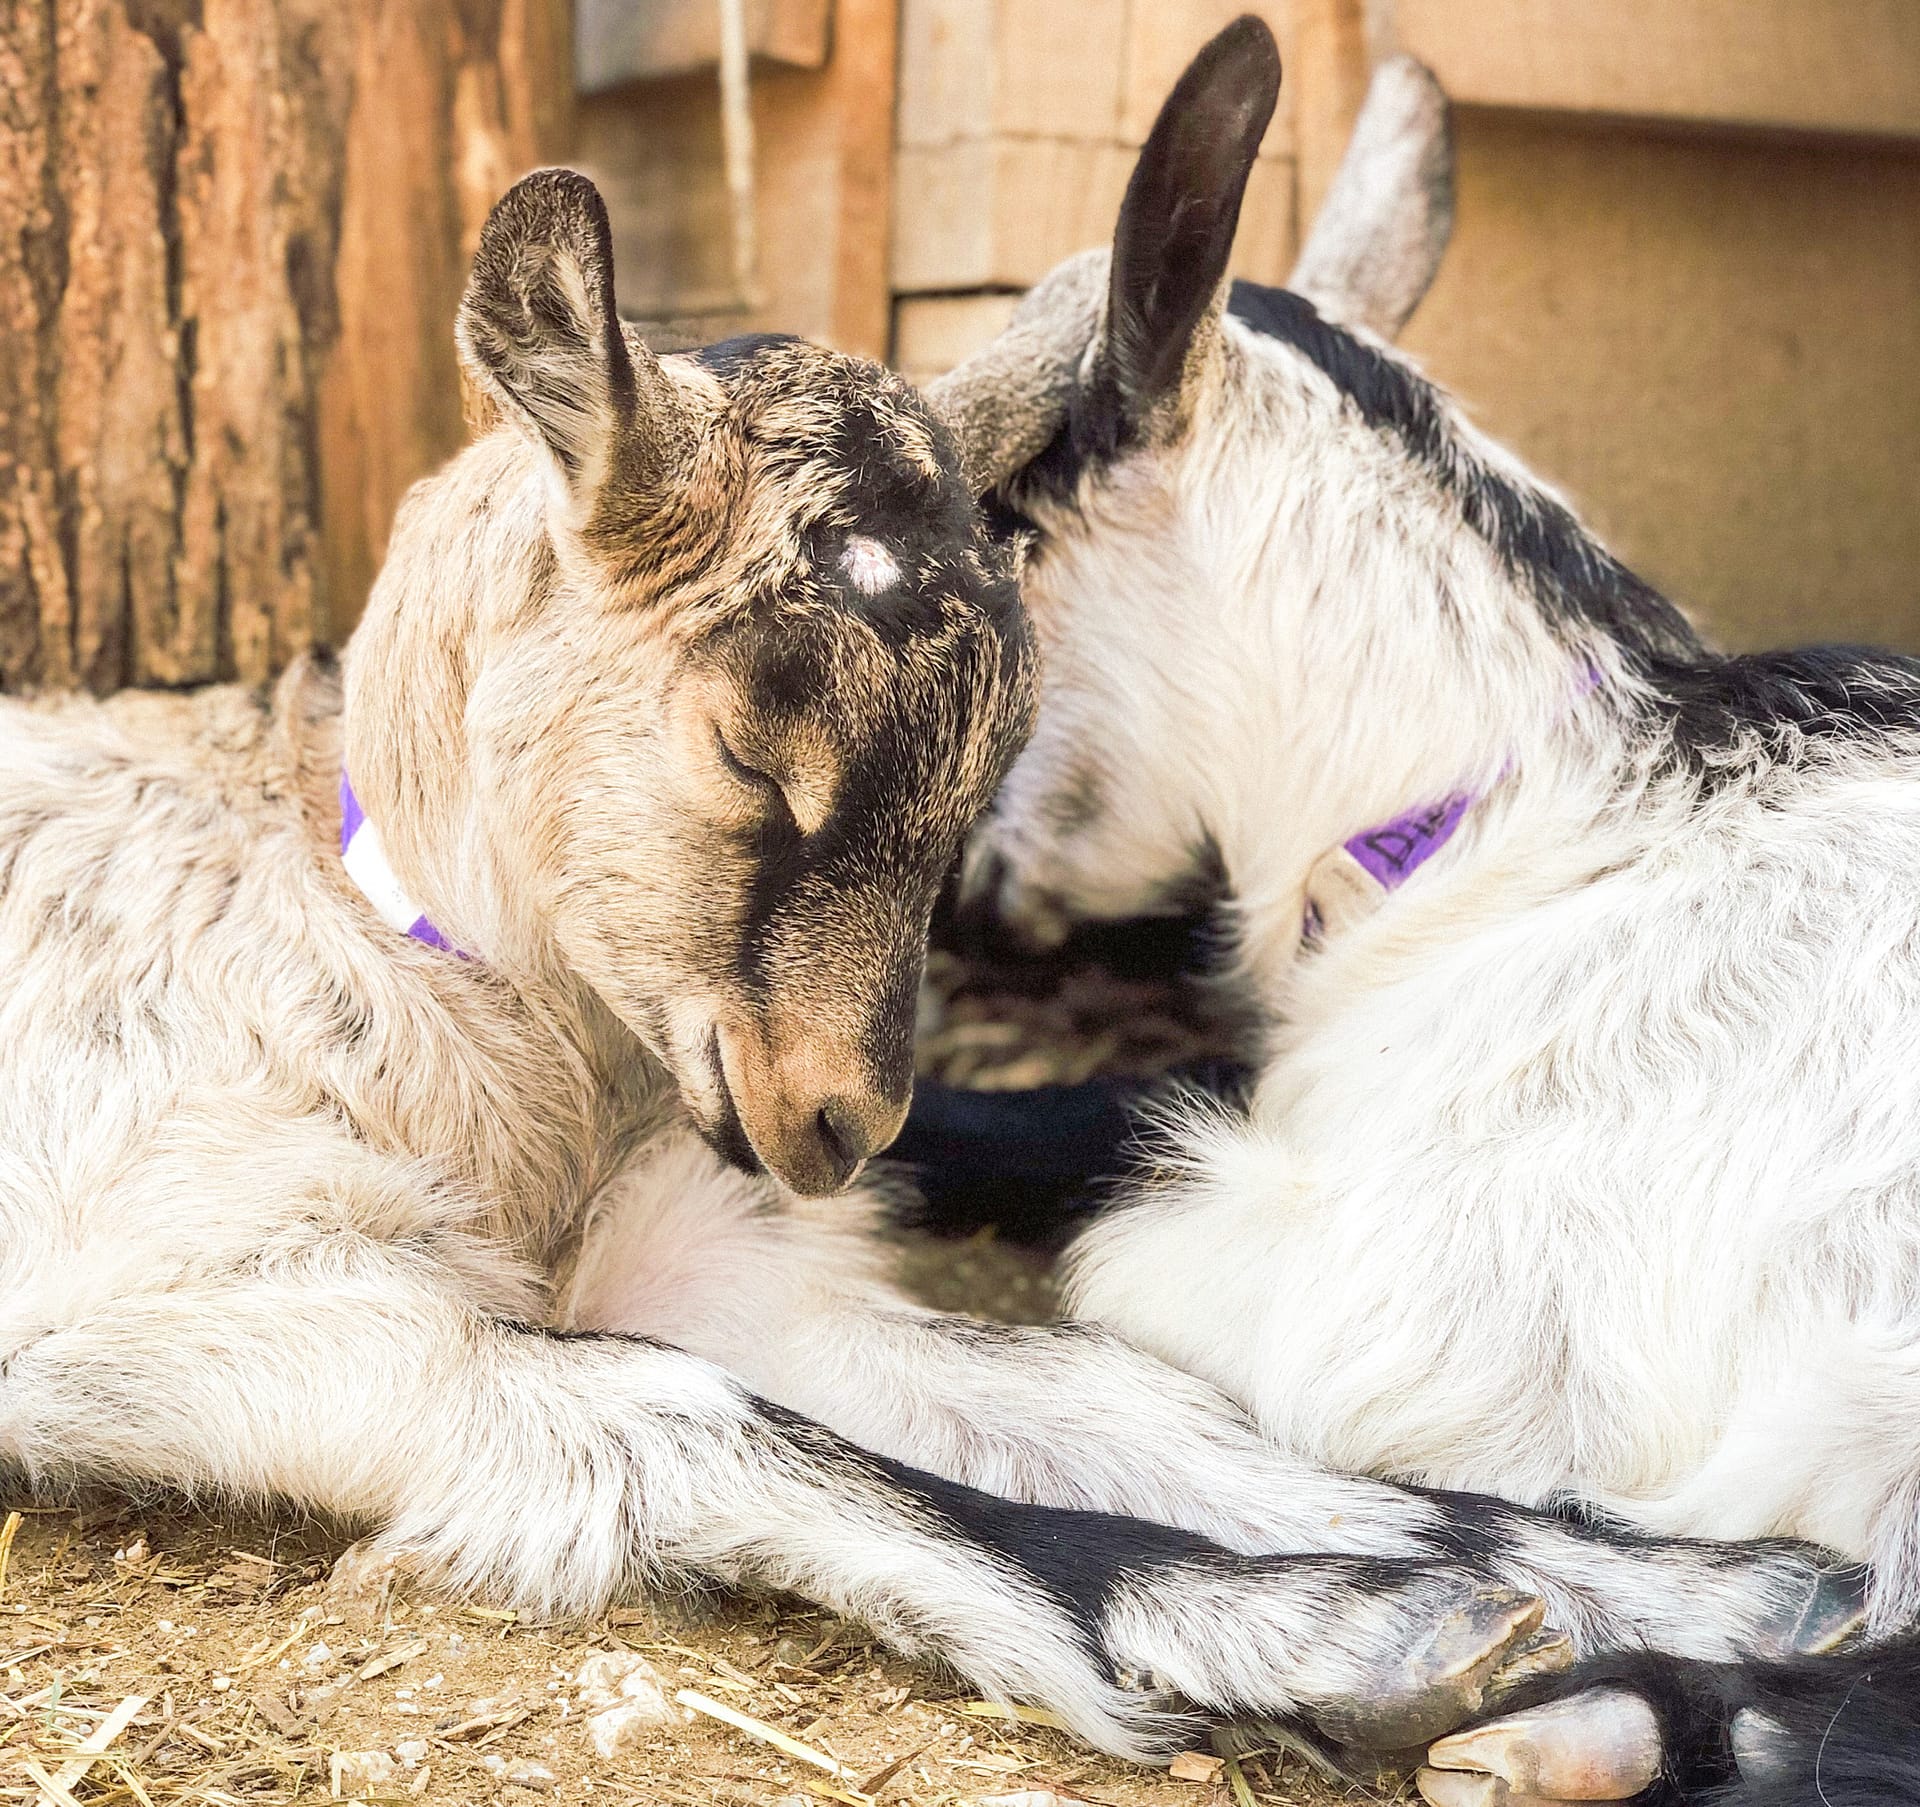 Two baby goats sleeping with heir heads touching